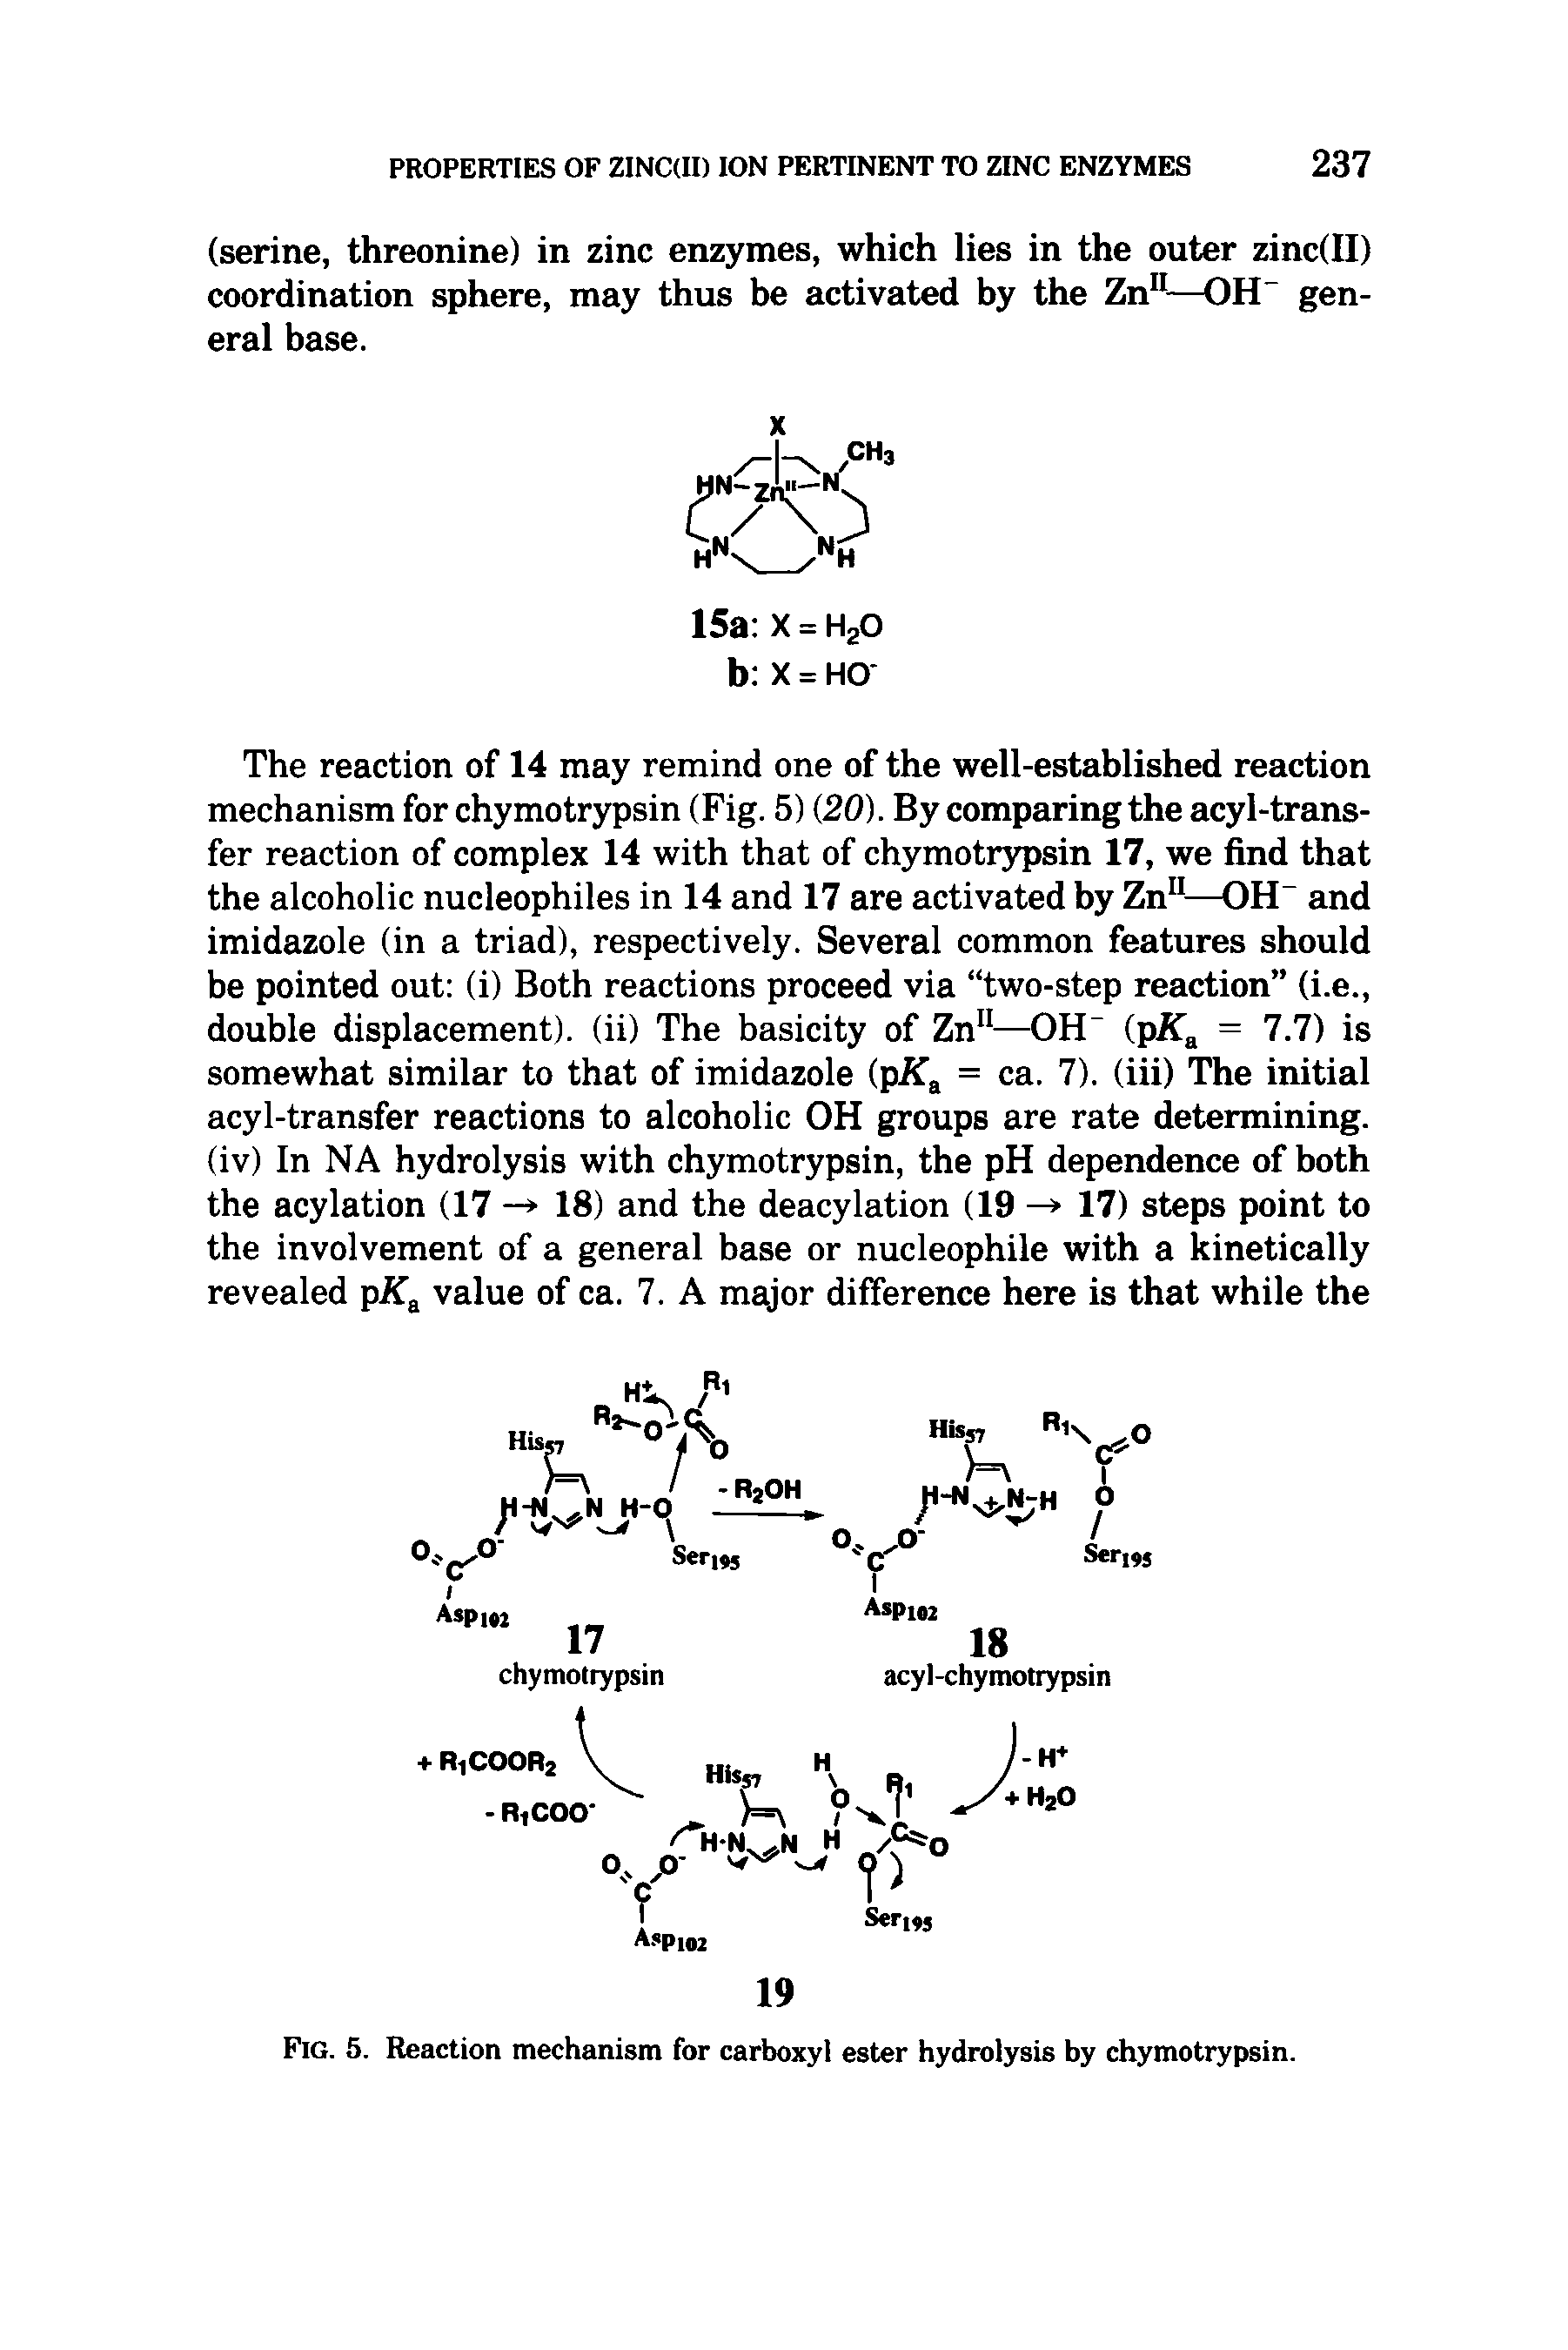 Fig. 5. Reaction mechanism for carboxyl ester hydrolysis by chymotrypsin.